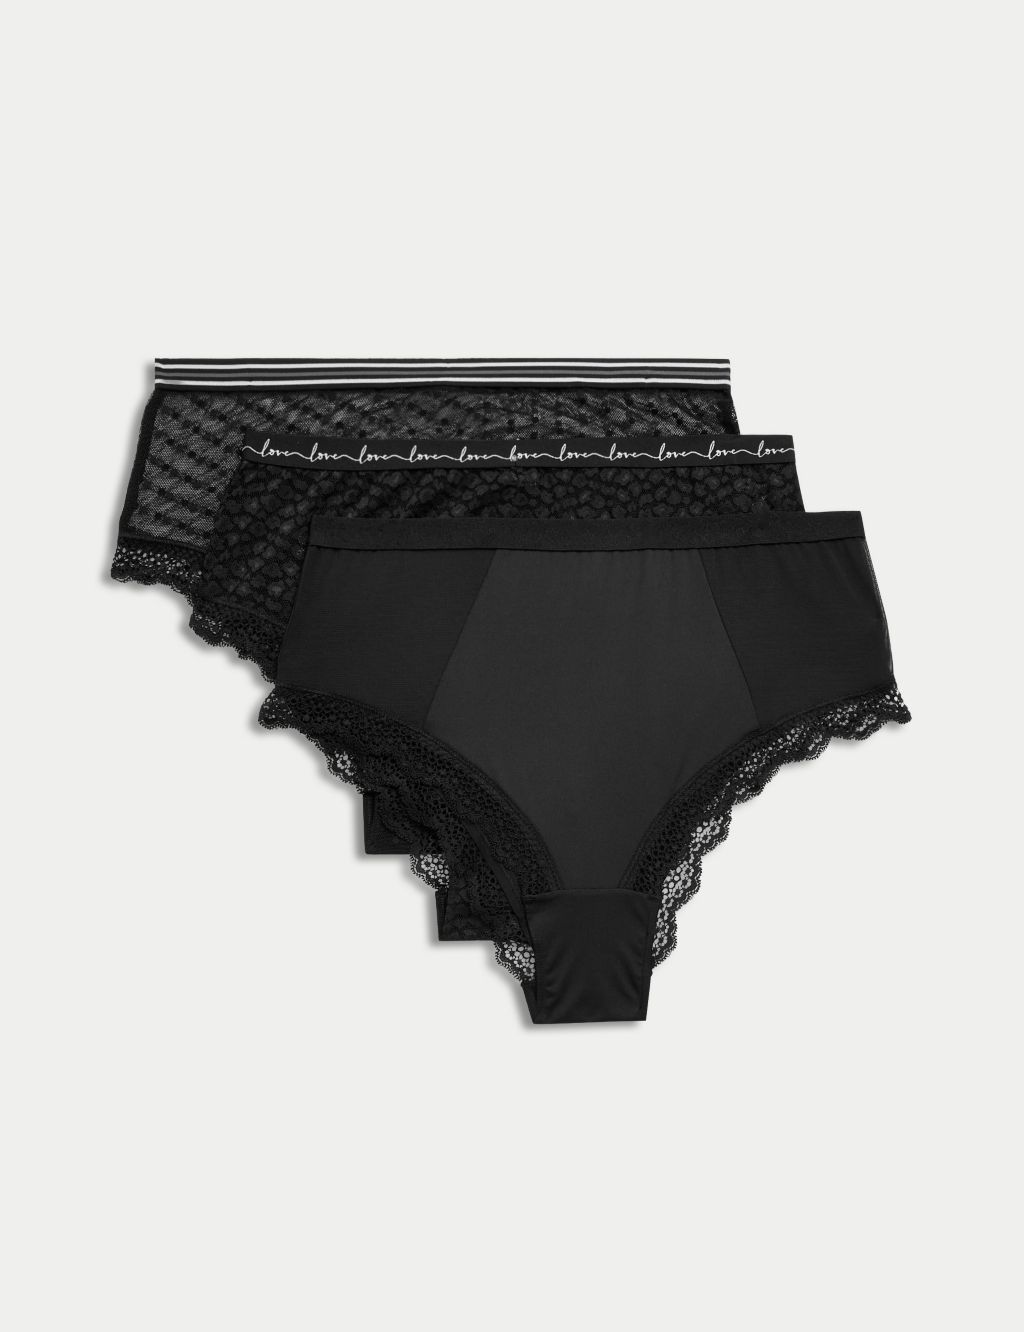 Sweaty Betty Barely There Knickers, Pack of 3, Black, XS